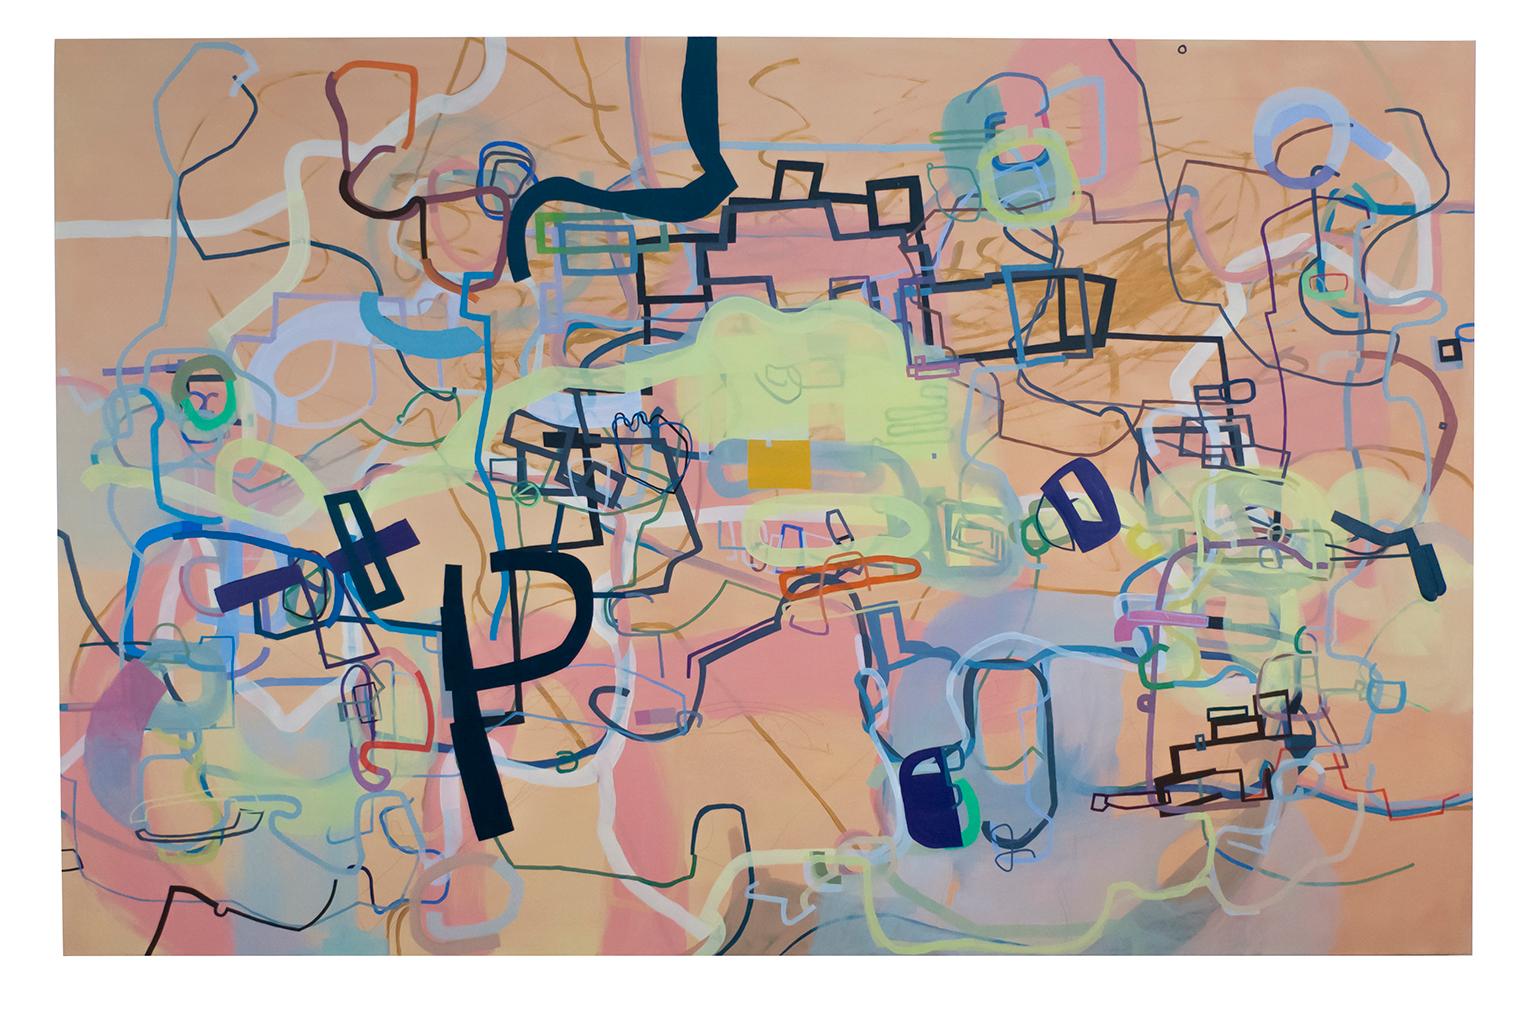 "A History of the World in Six Easy Installments", Large Scale Abstract Painting - Art by Mark Masyga